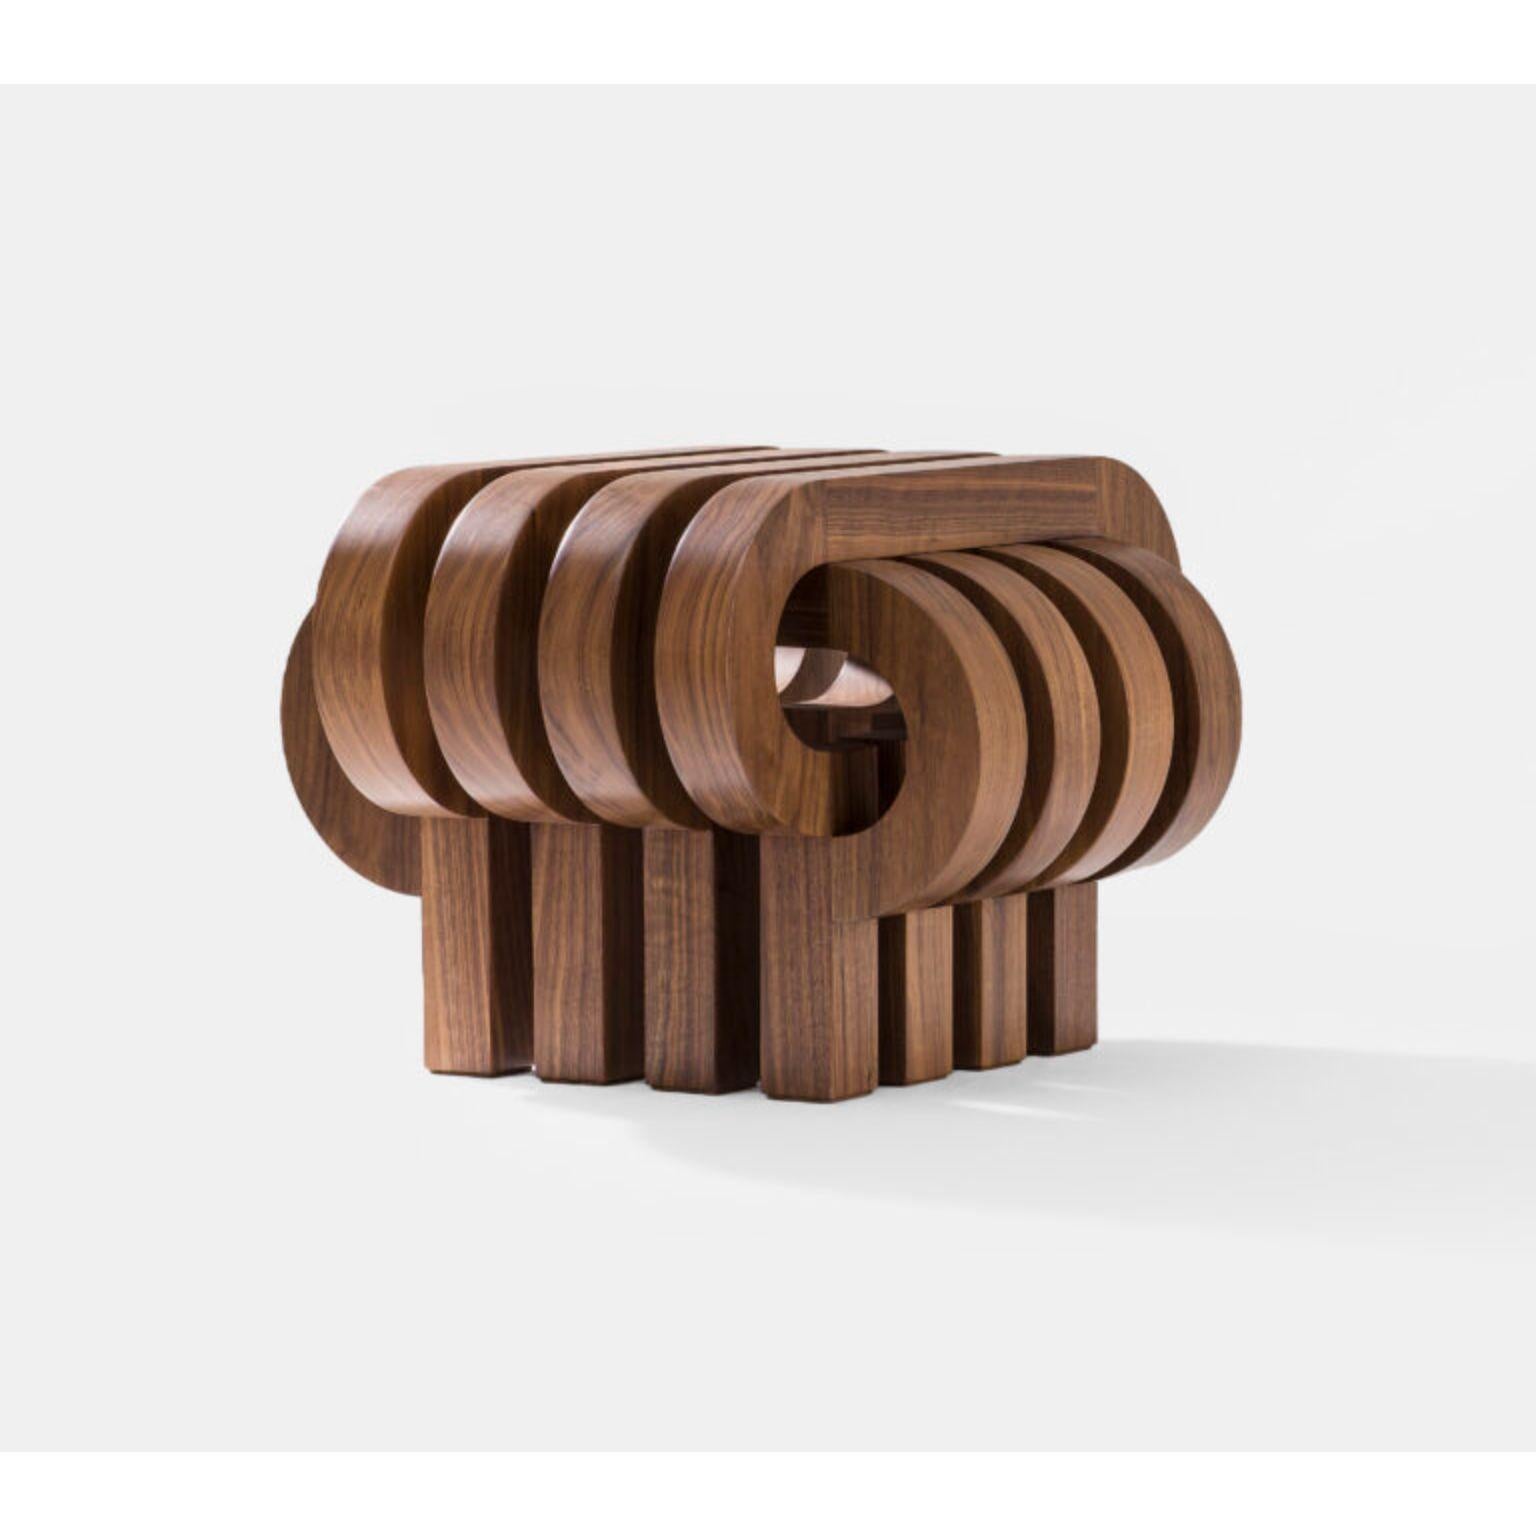 Tamga American Walnut Stool by Tolga Sencer
Dimensions: D 55.5 x W 55.5 x H 40 cm.
Materials: American walnut.

Available in different wood options (massive american walnut, massive wenge, oak, afromosia or black lacquer with stainless steel